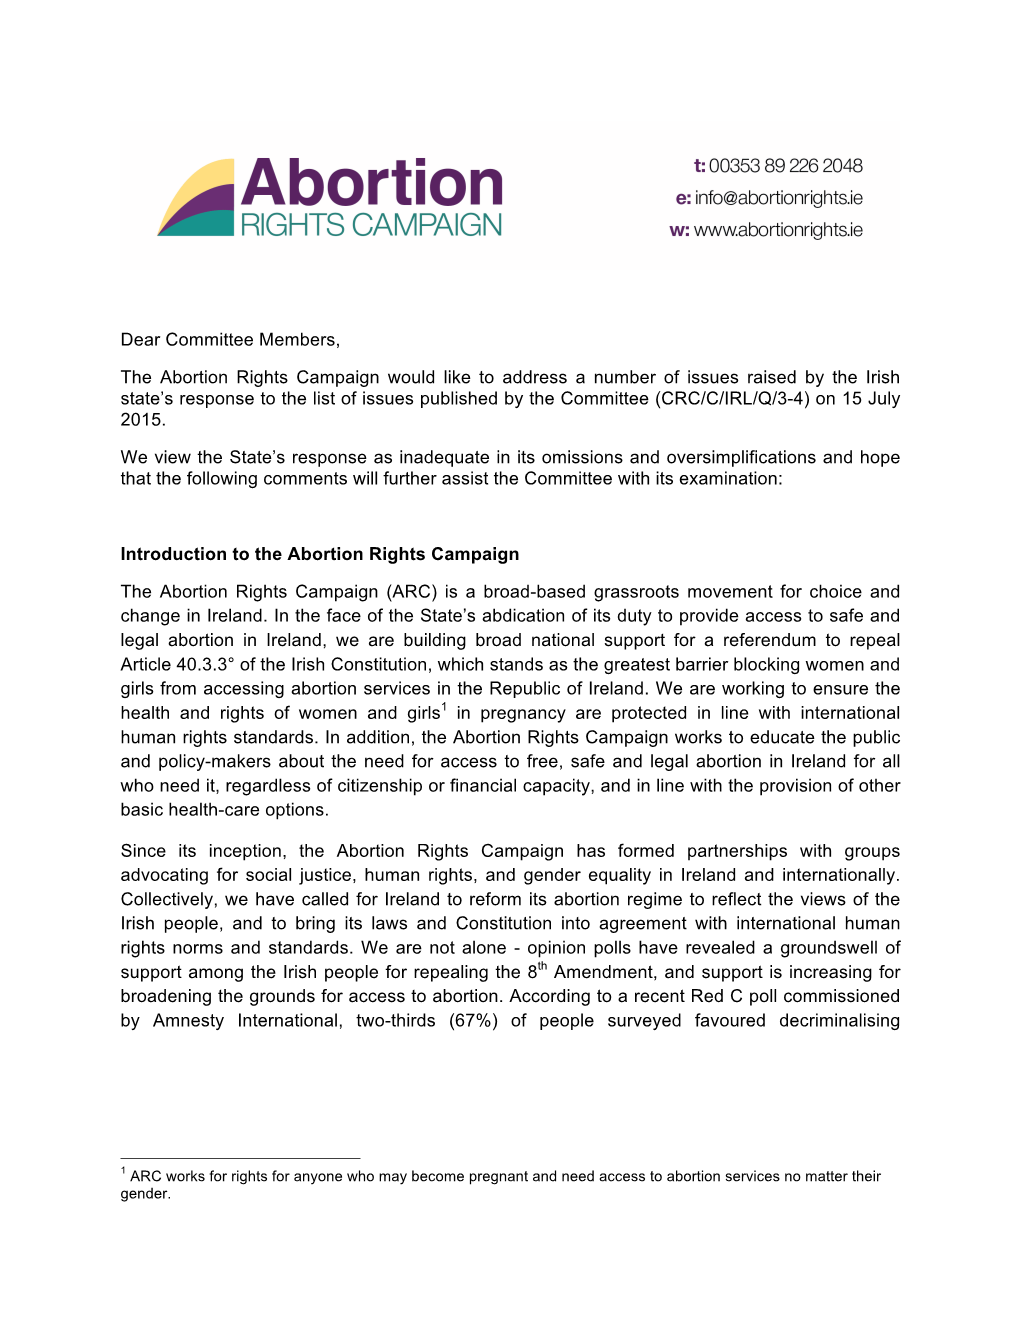 Dear Committee Members, the Abortion Rights Campaign Would